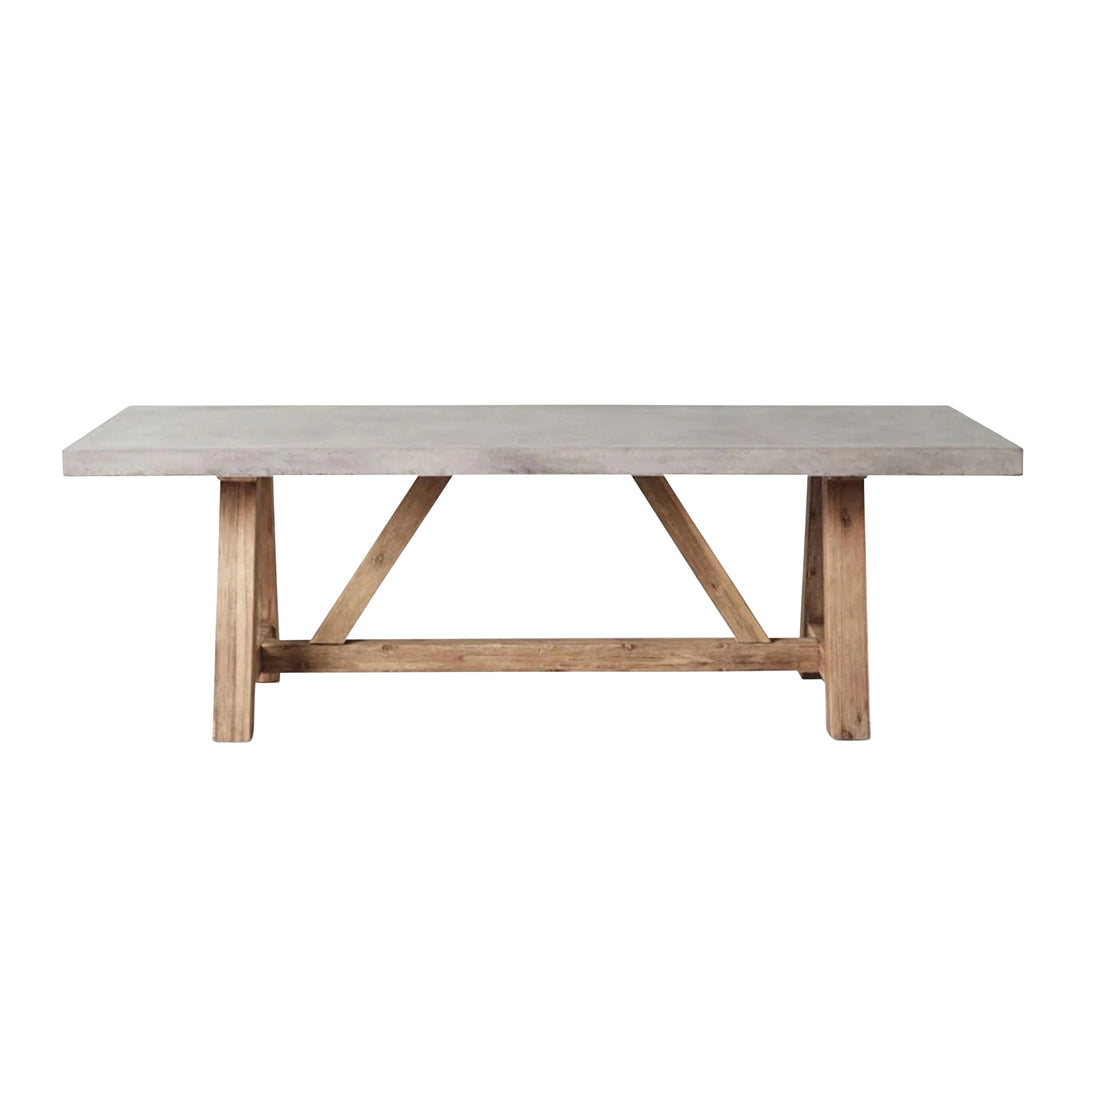 Wood and Concrete Table Wood and Stone Designs